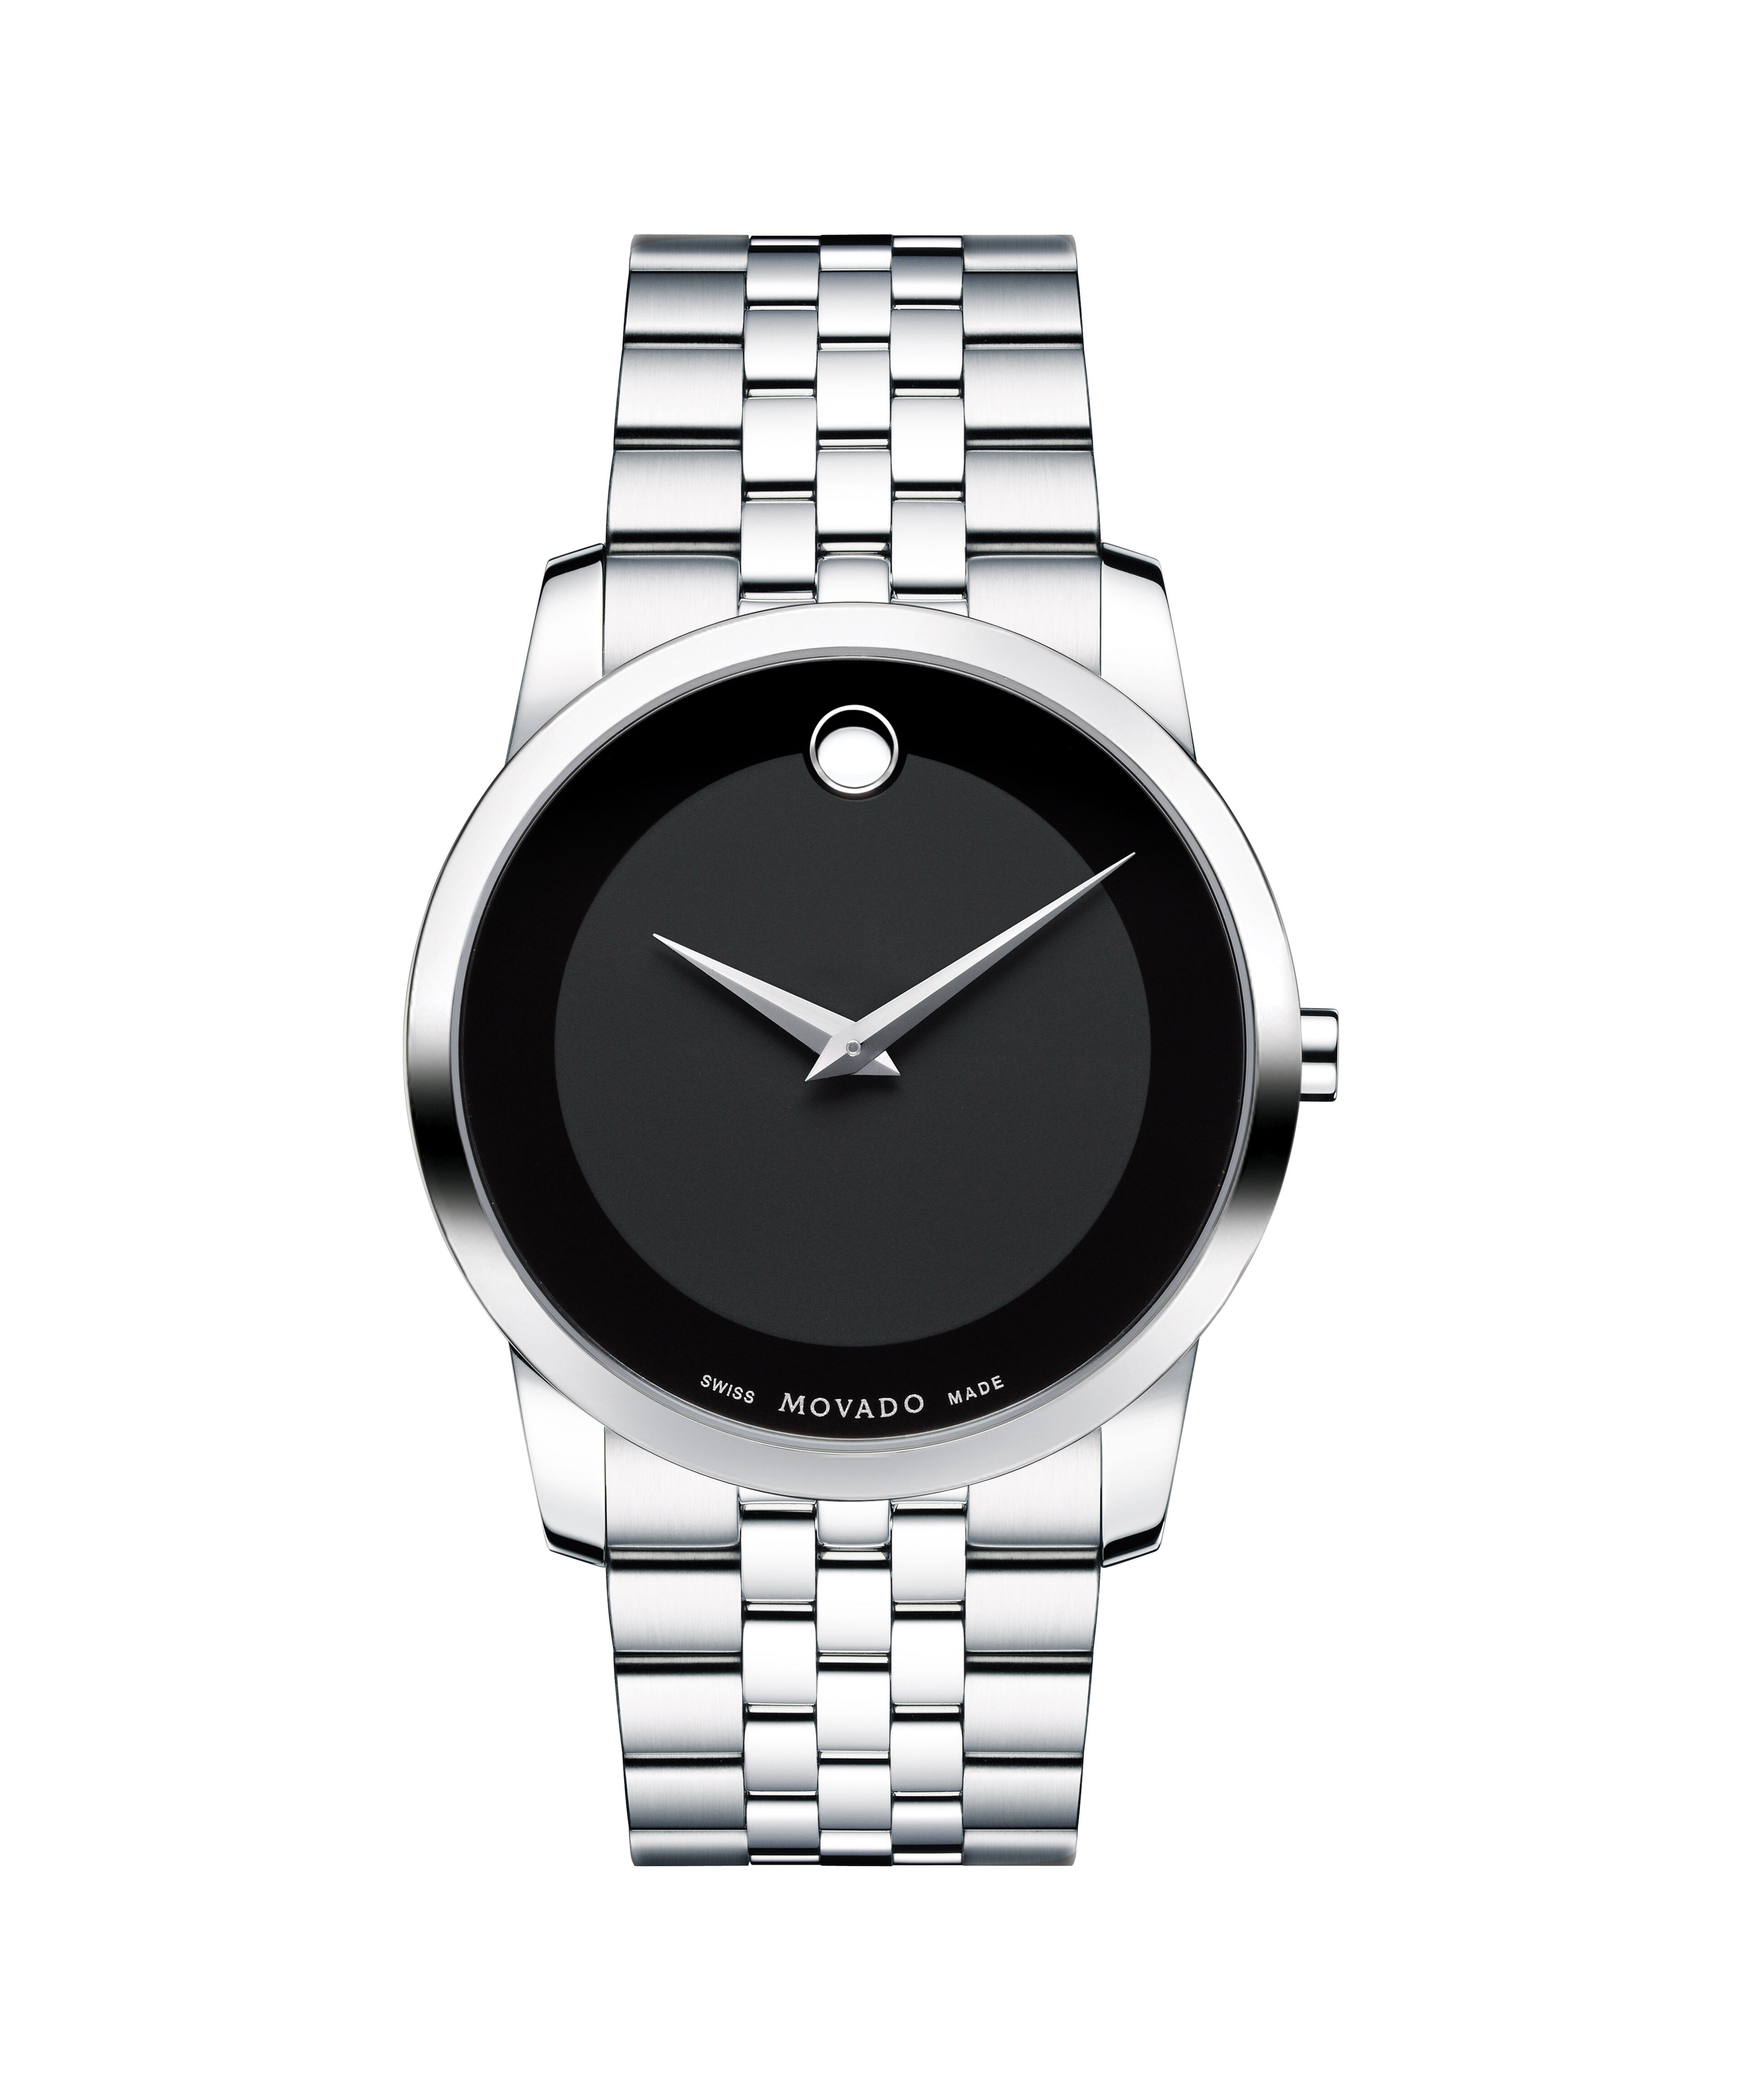 Movado Museum Classic Steel Black Dial 35mm / ref. 84-C6-860Movado 18k White Gold Manual-Wind 40mm Leather Strap Men's Watch